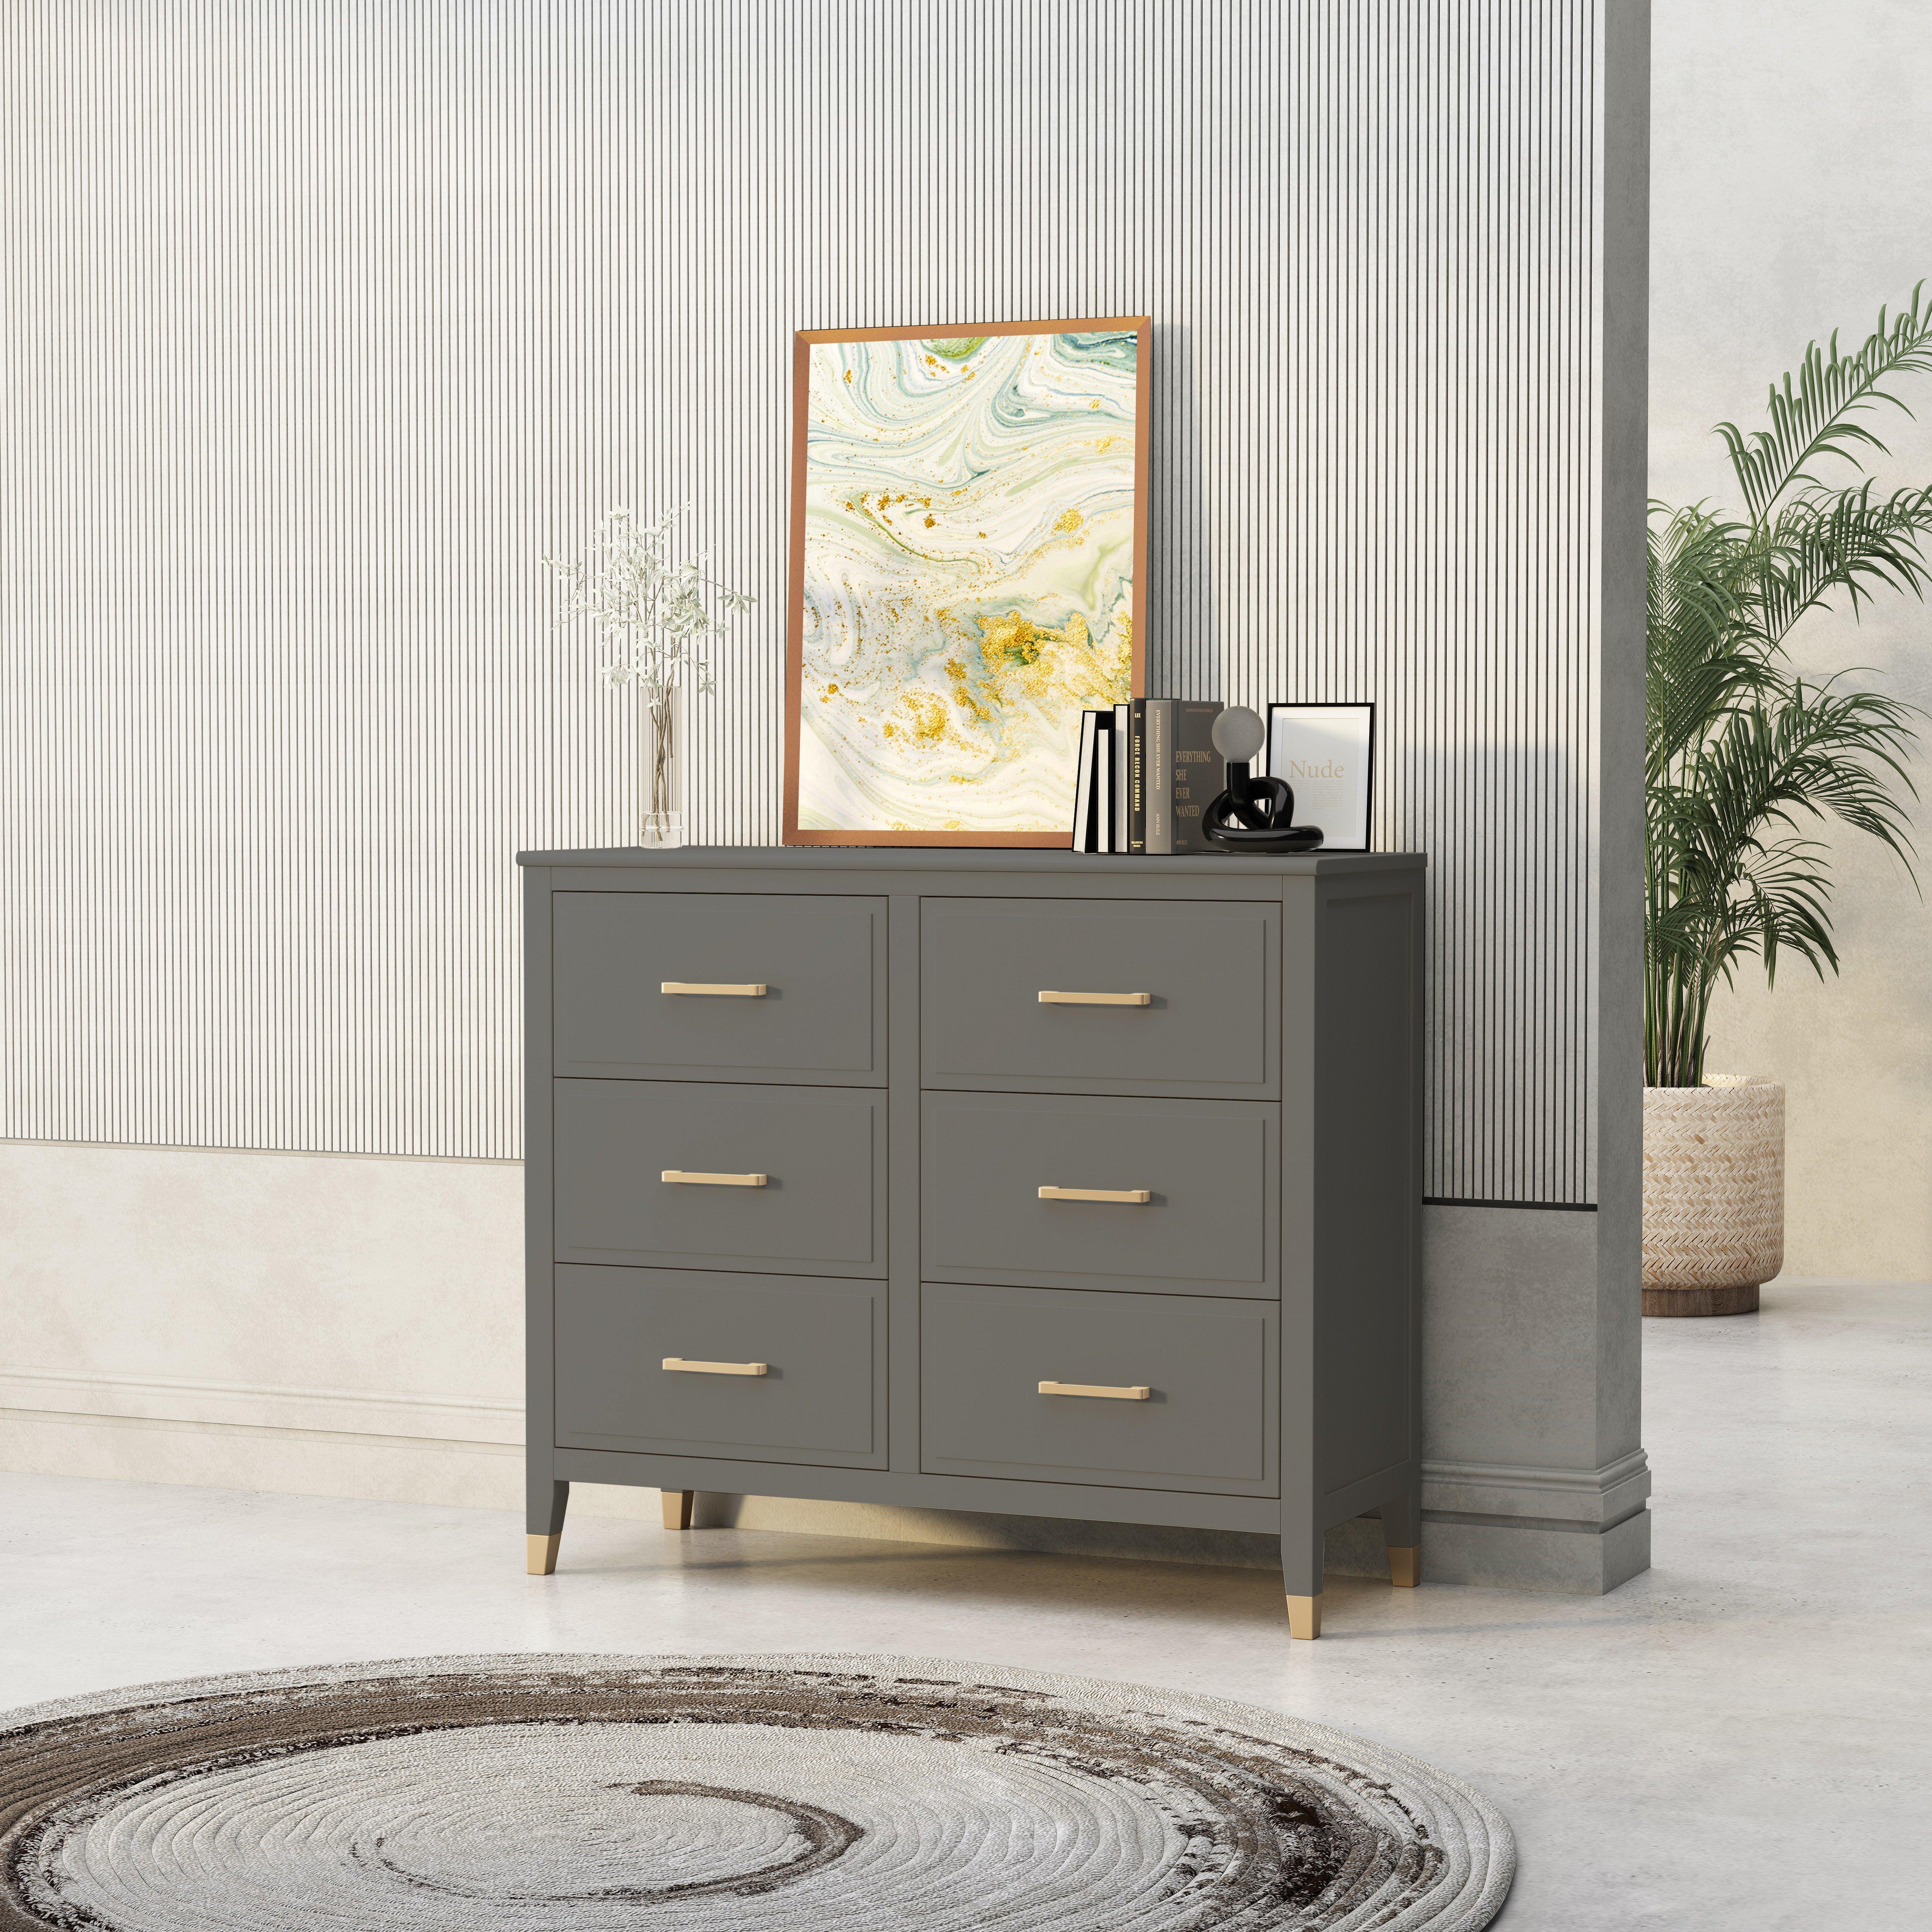 Palazzi 6 Drawer Chest of Drawers